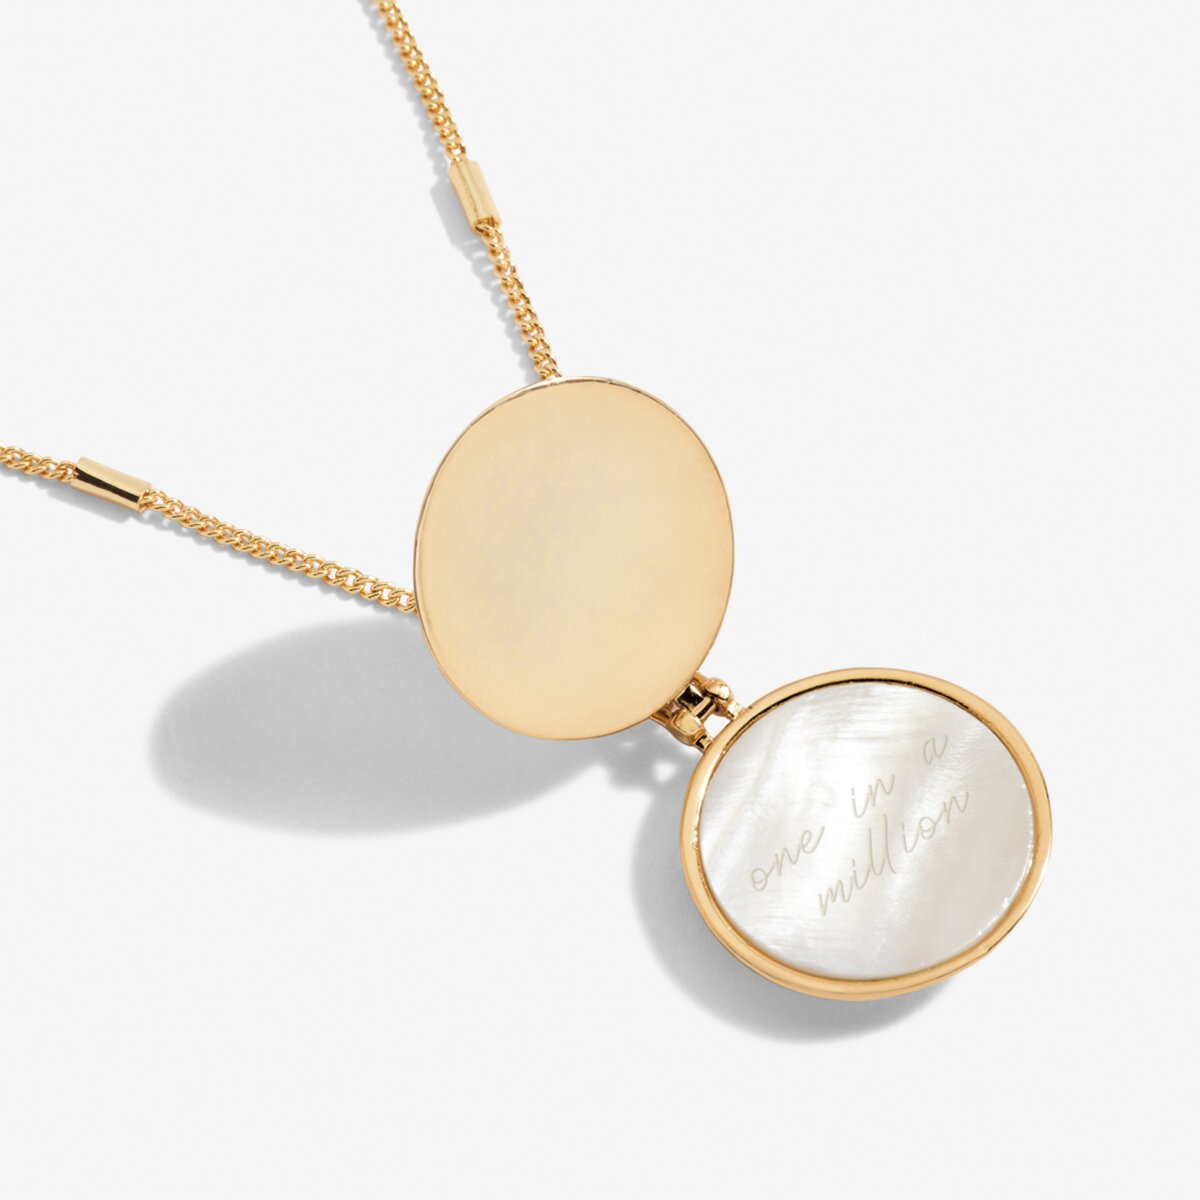 My Moments Locket Necklace | Joma Jewellery | One In A Million | Gold